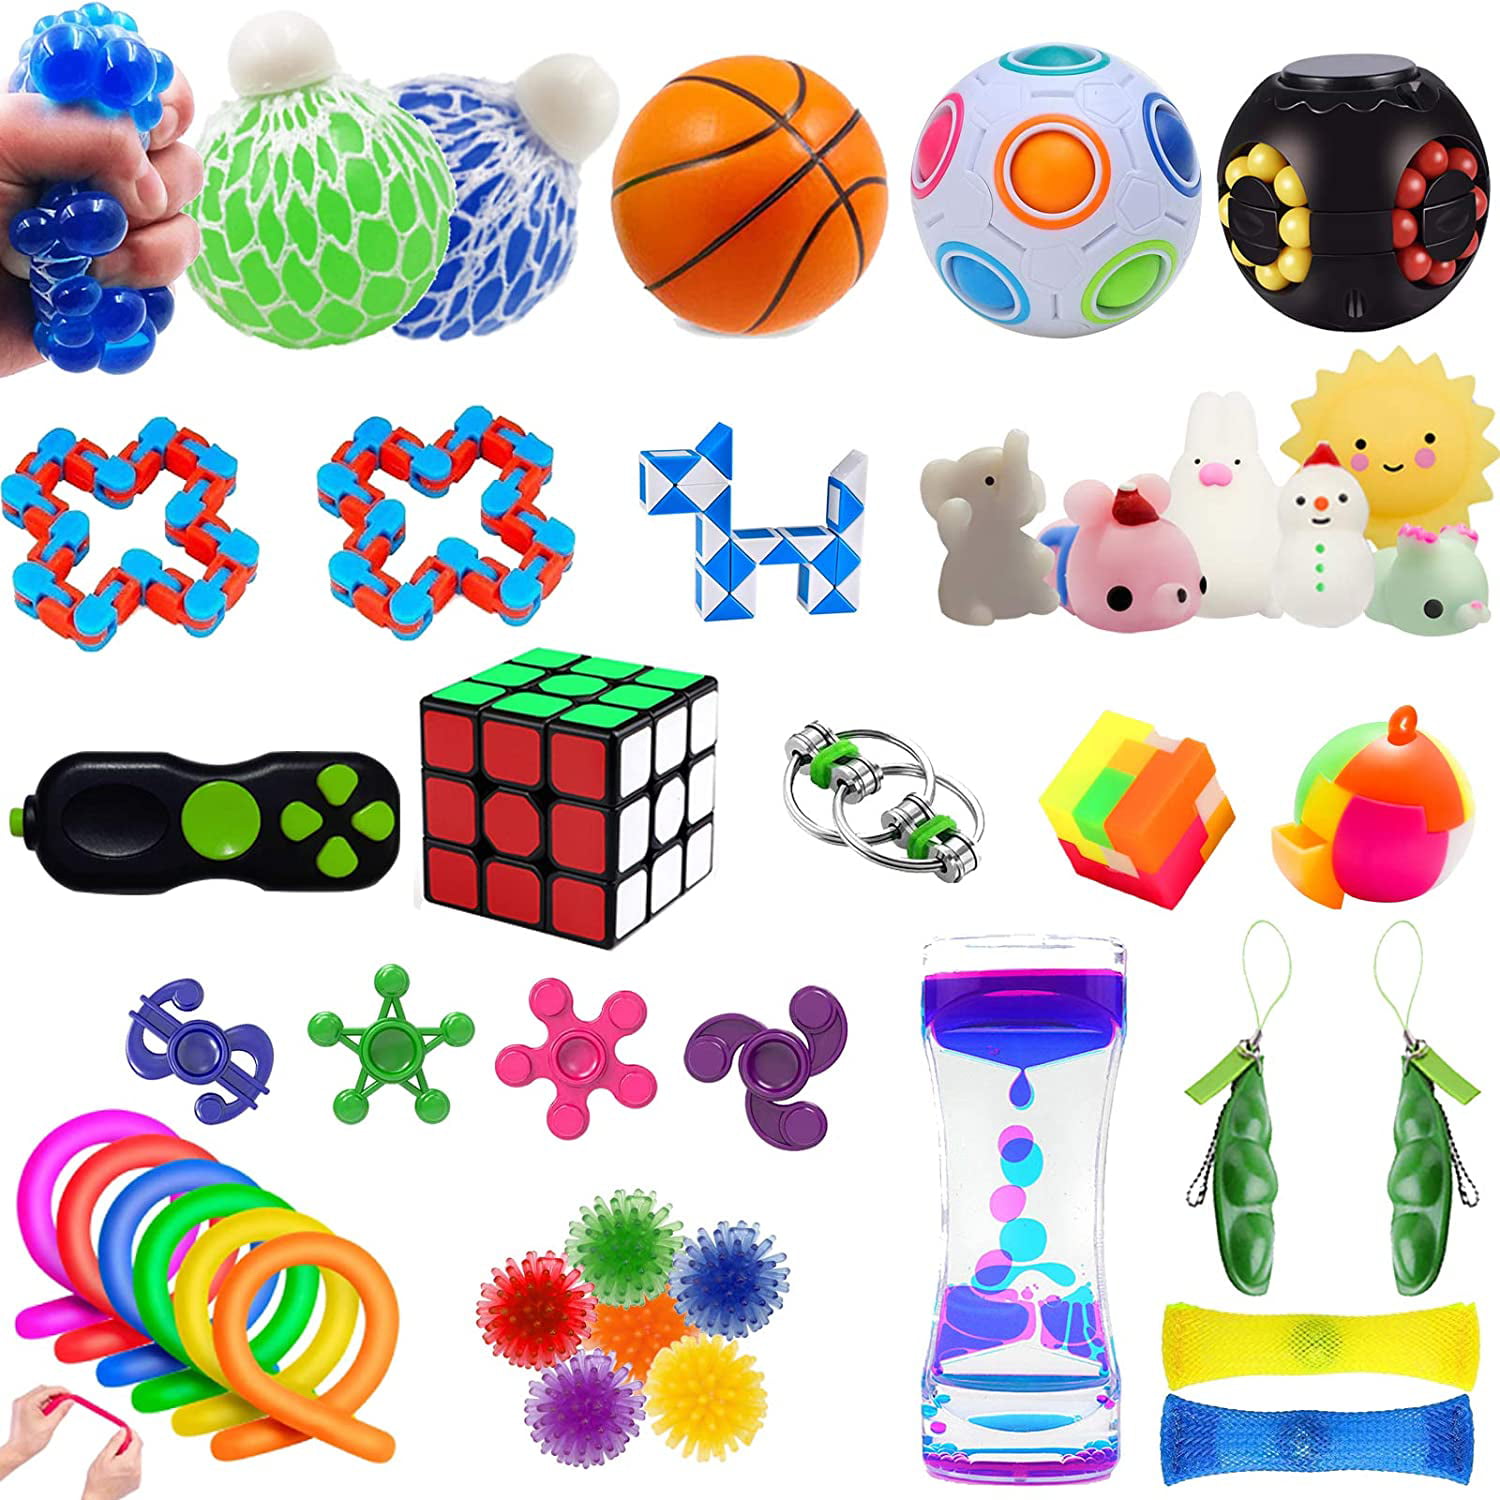 Details about   Fun Sensory Toy Fidget Stress Relief Sensory Autism ADHD Need Kids Adults Gifts 